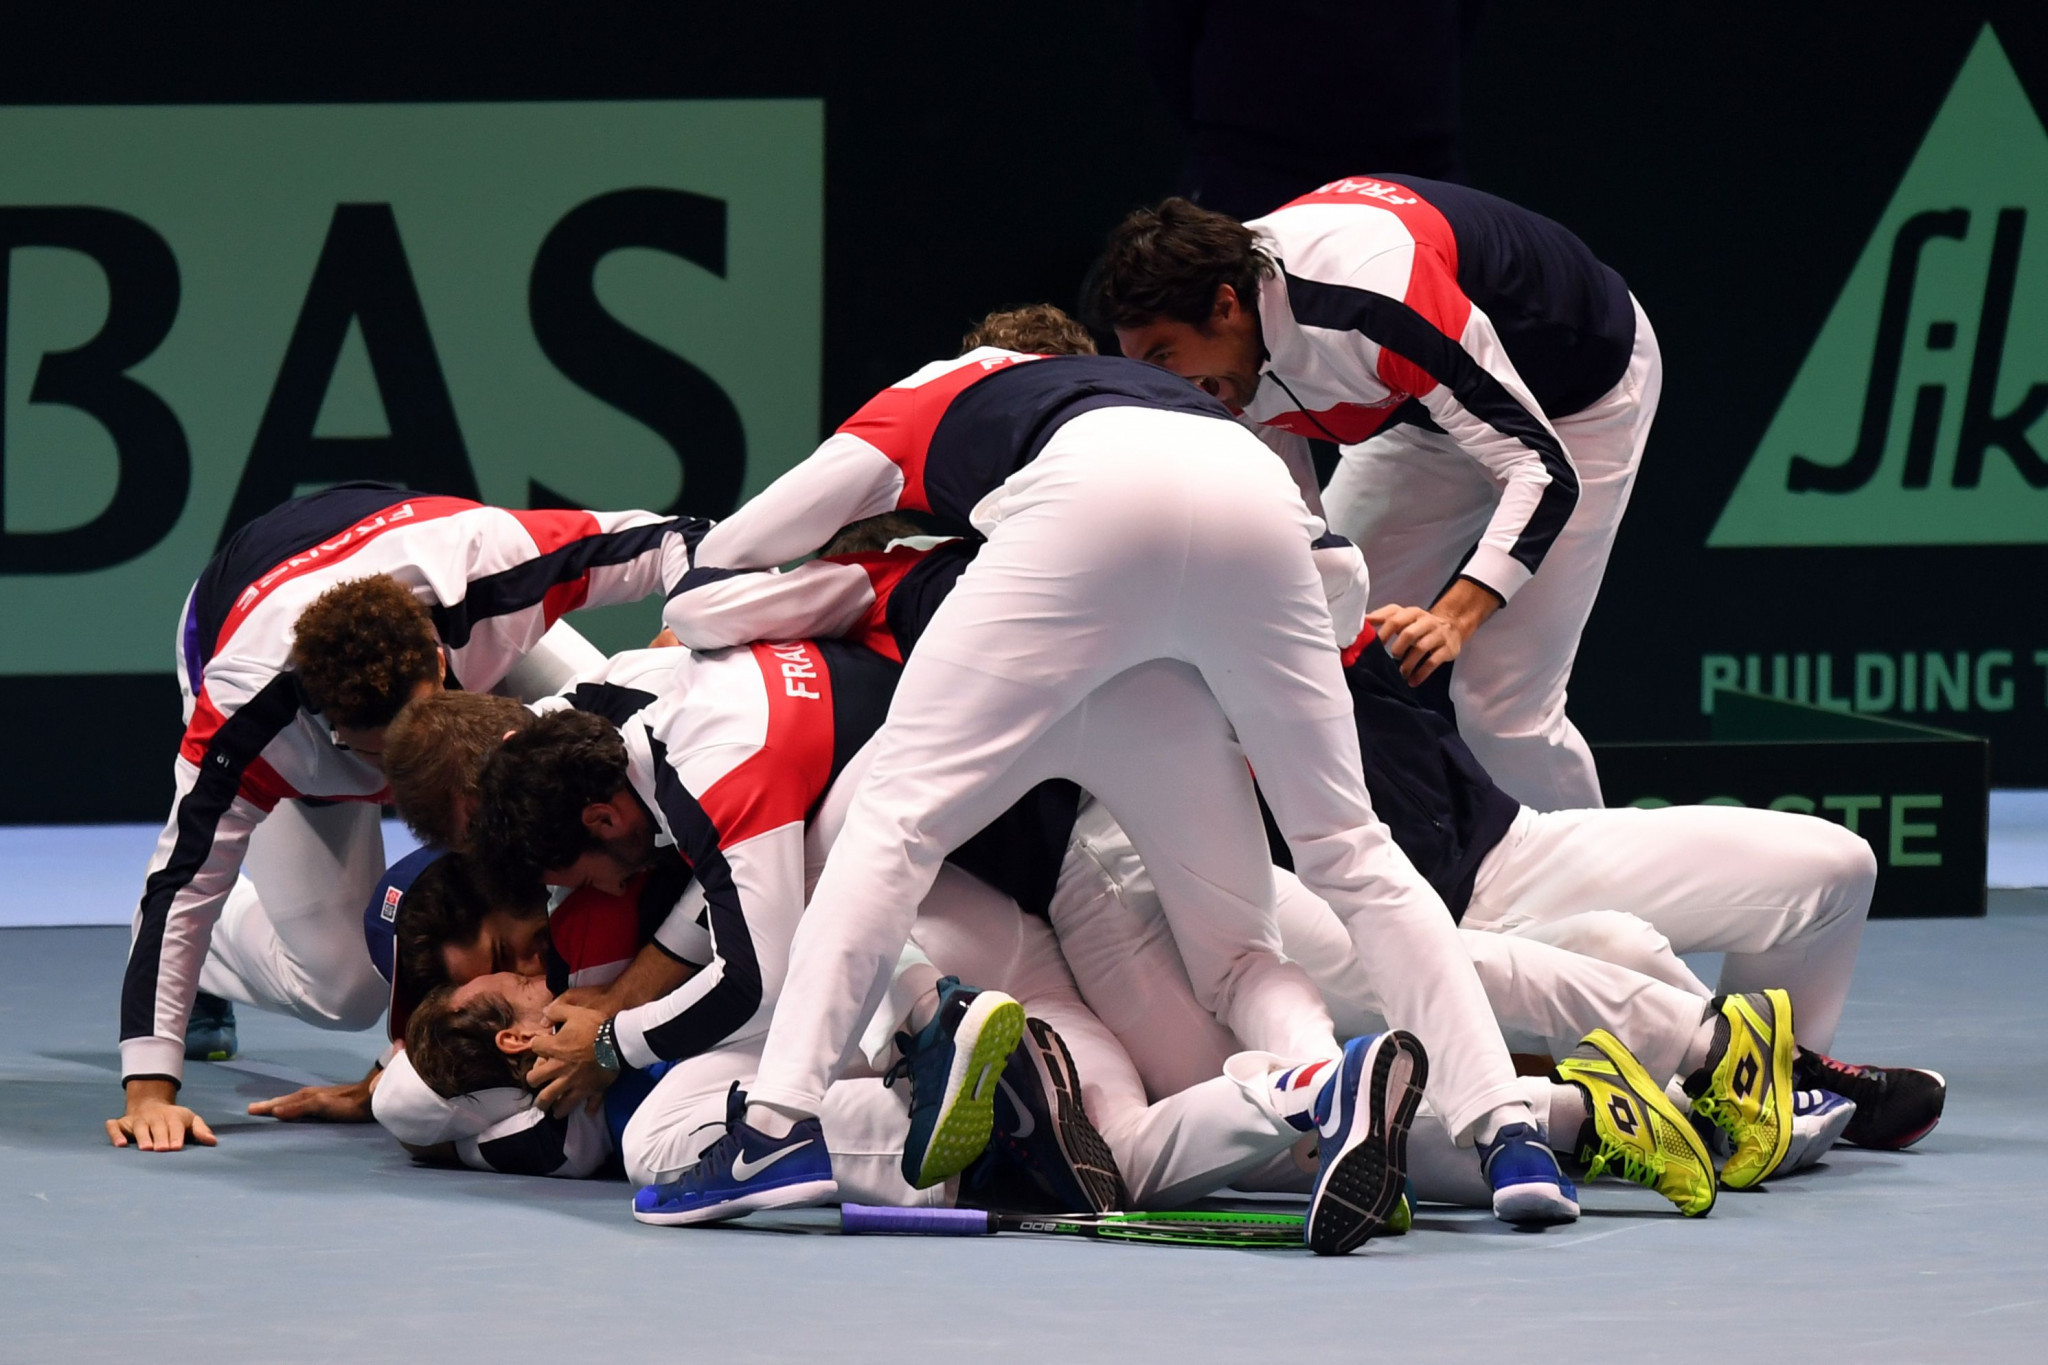 A jubilant France team celebrate their first Davis Cup success in 16 years after a thrilling 3-2 victory over Belgium in Lille ©Getty Images